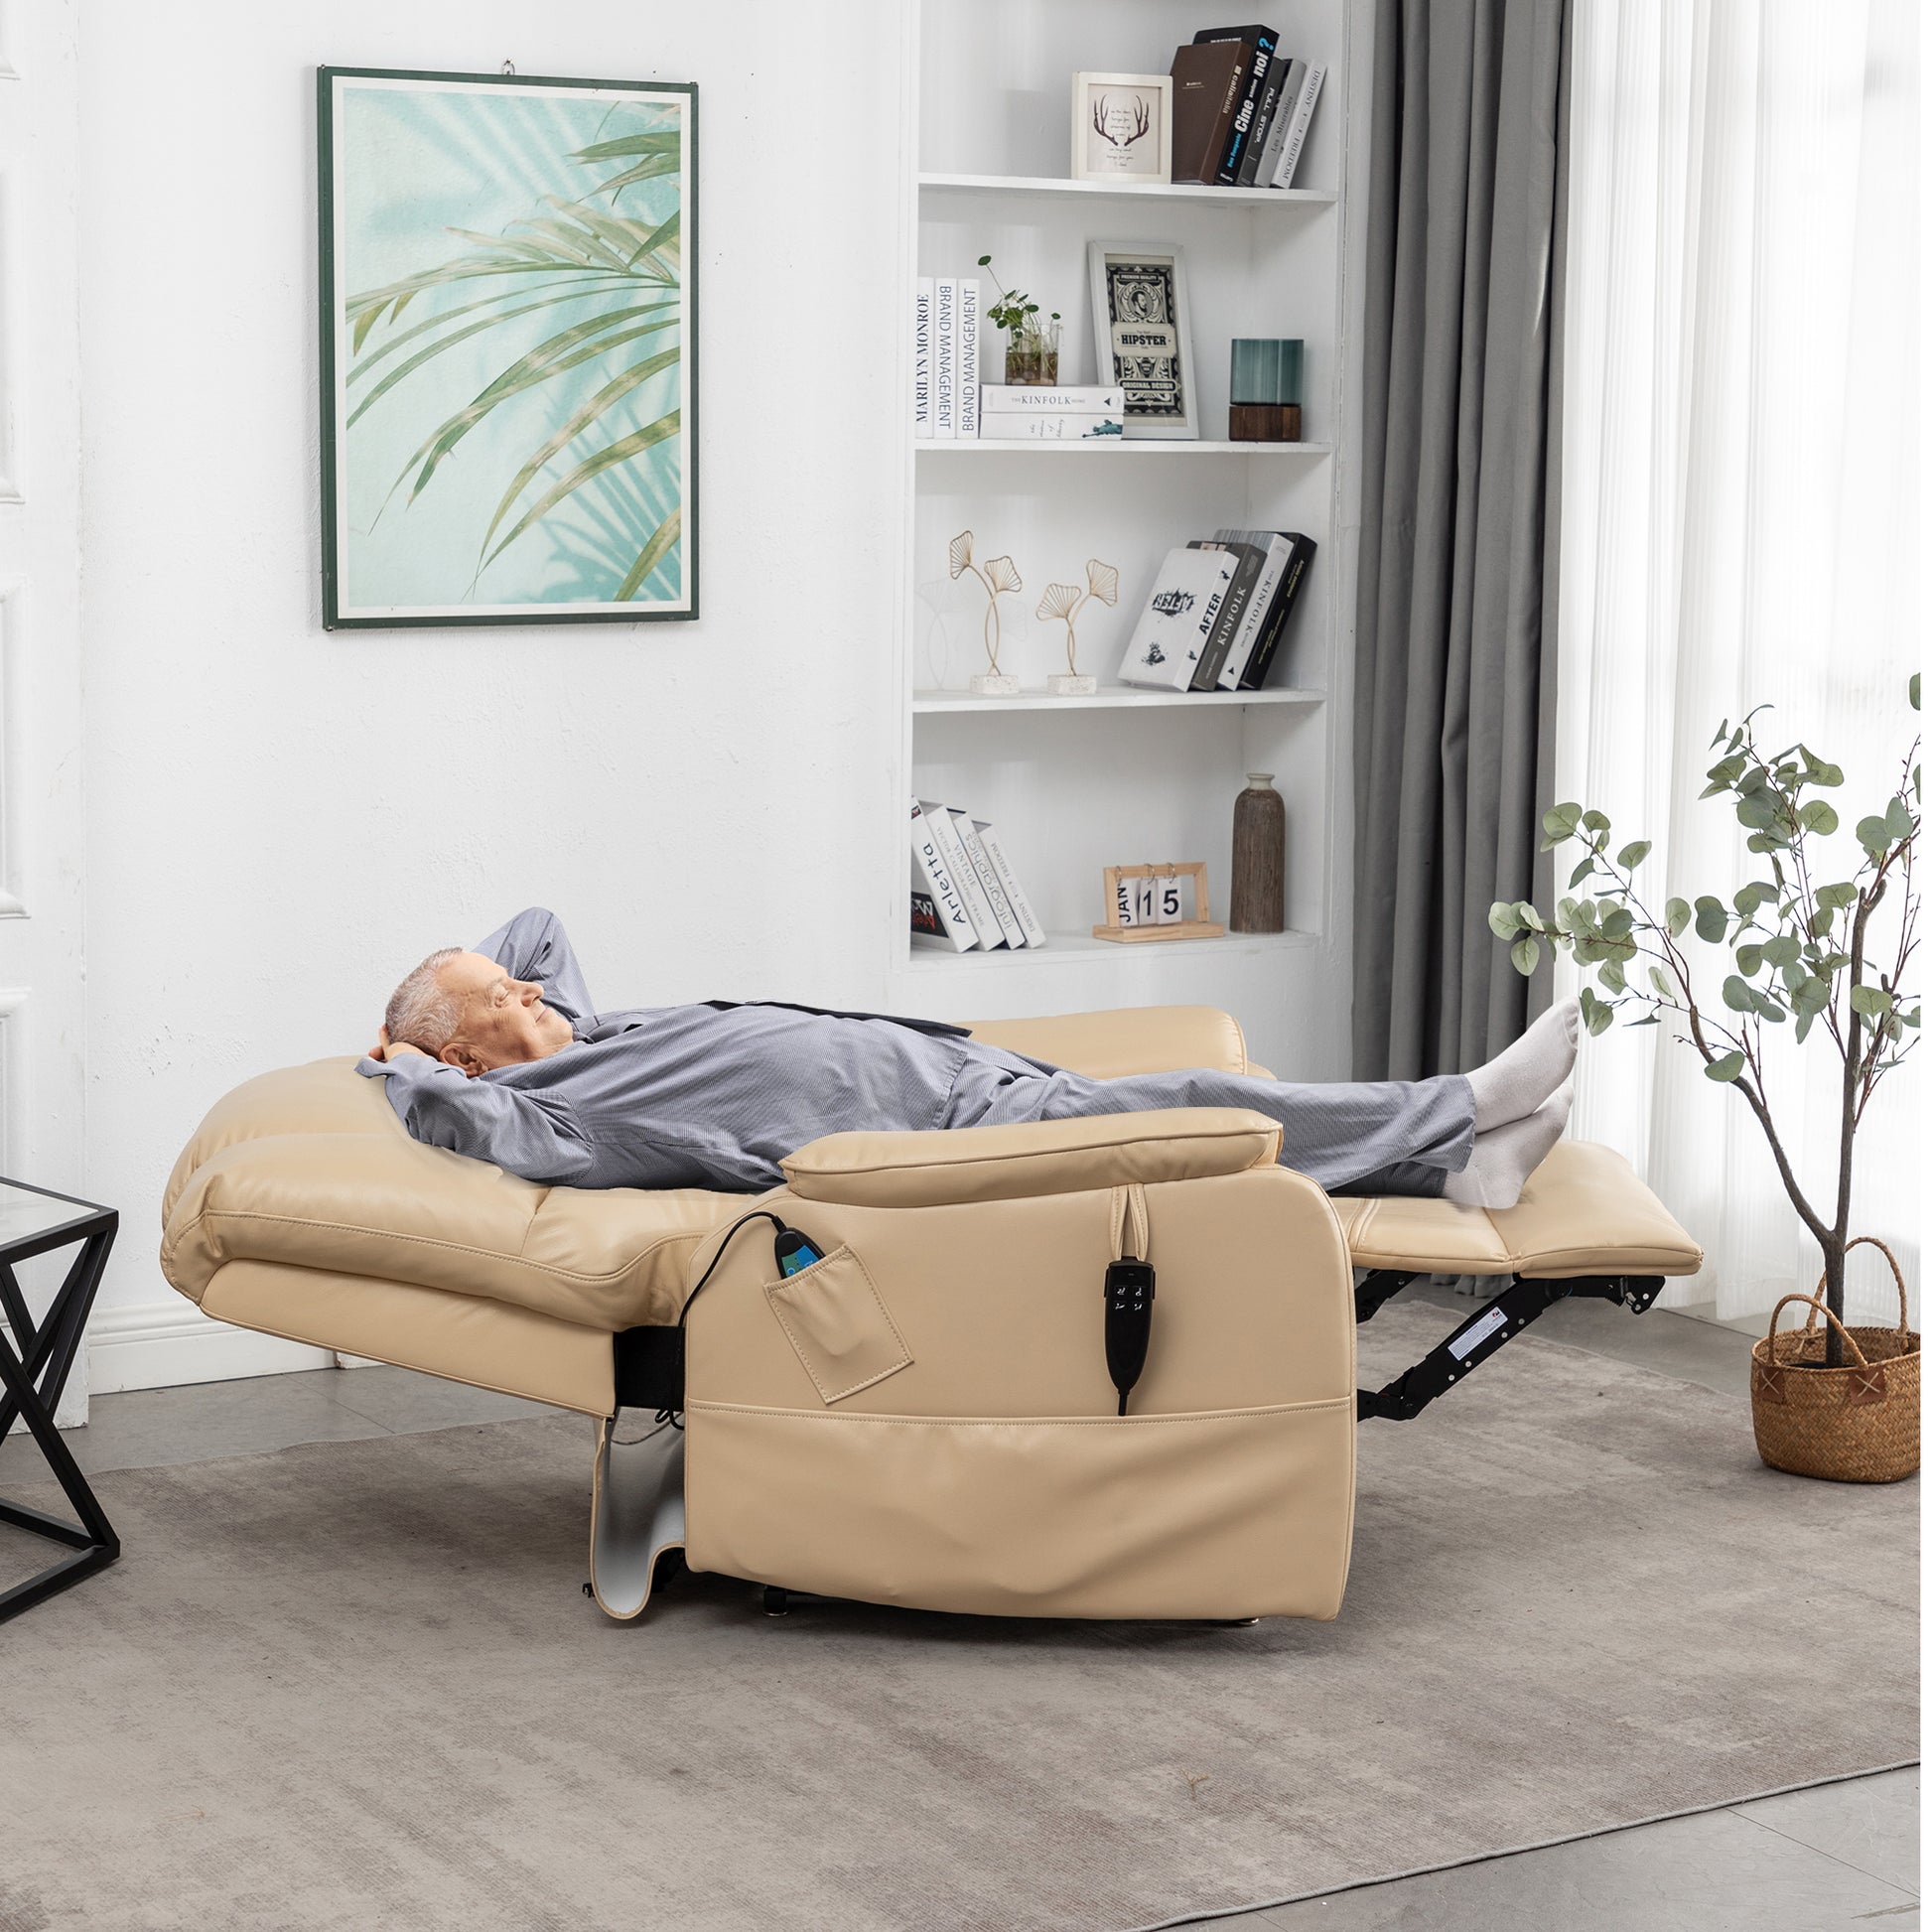 HSUNNS Manual Recliner Chair with Heat and Massage Function, USB